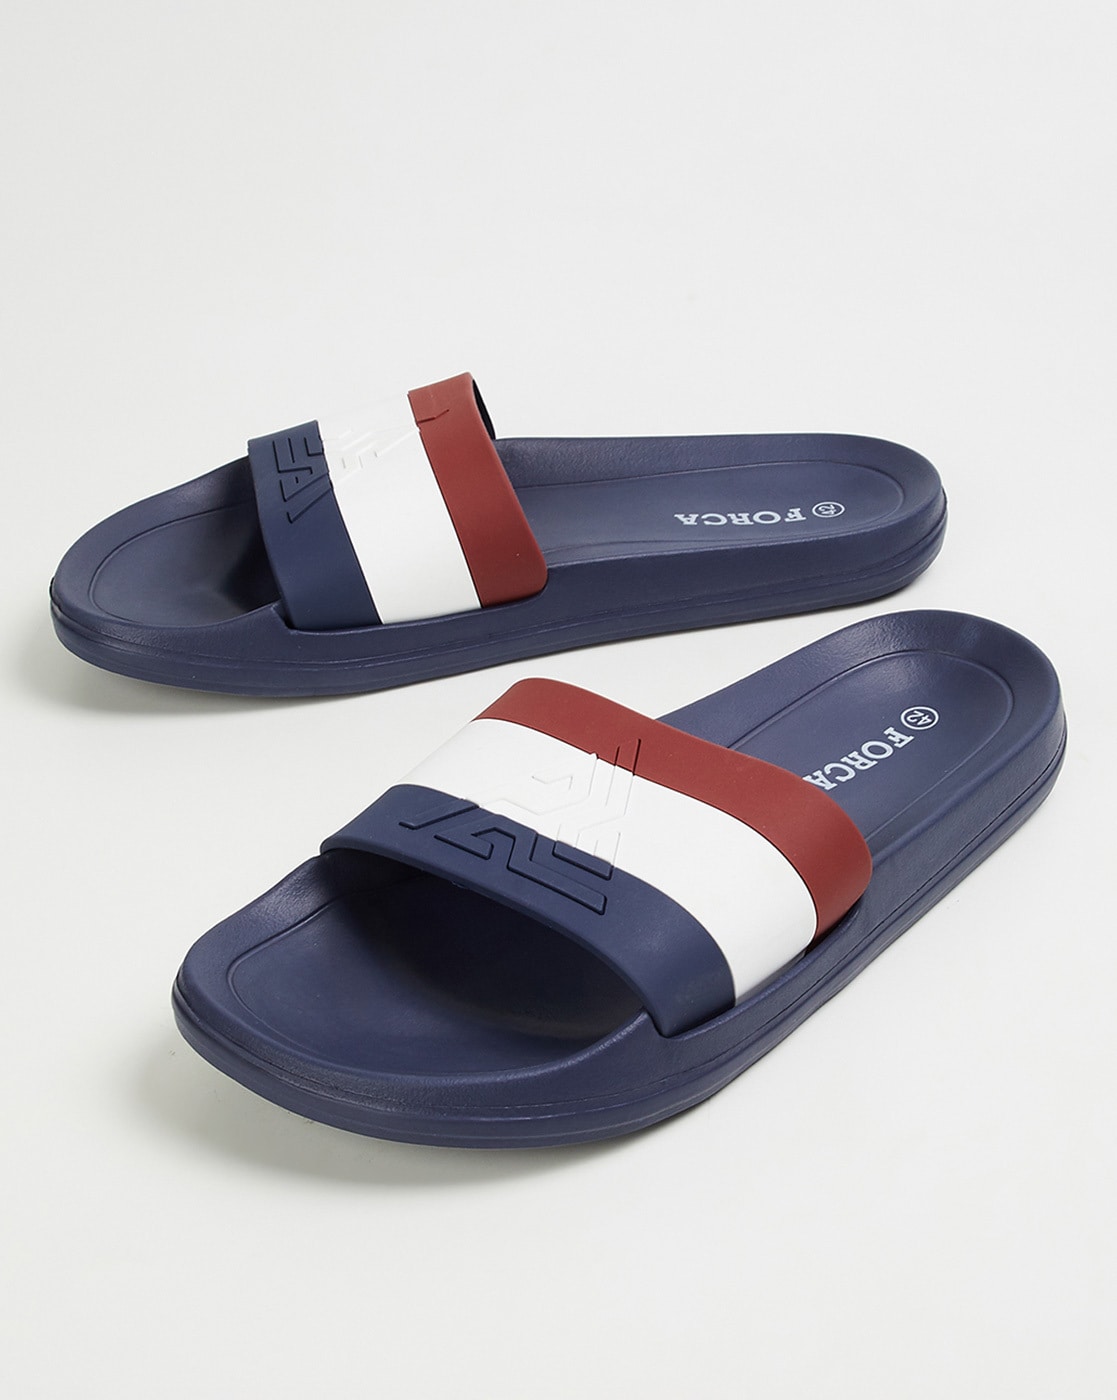 Enjoy more than 241 forca slippers best